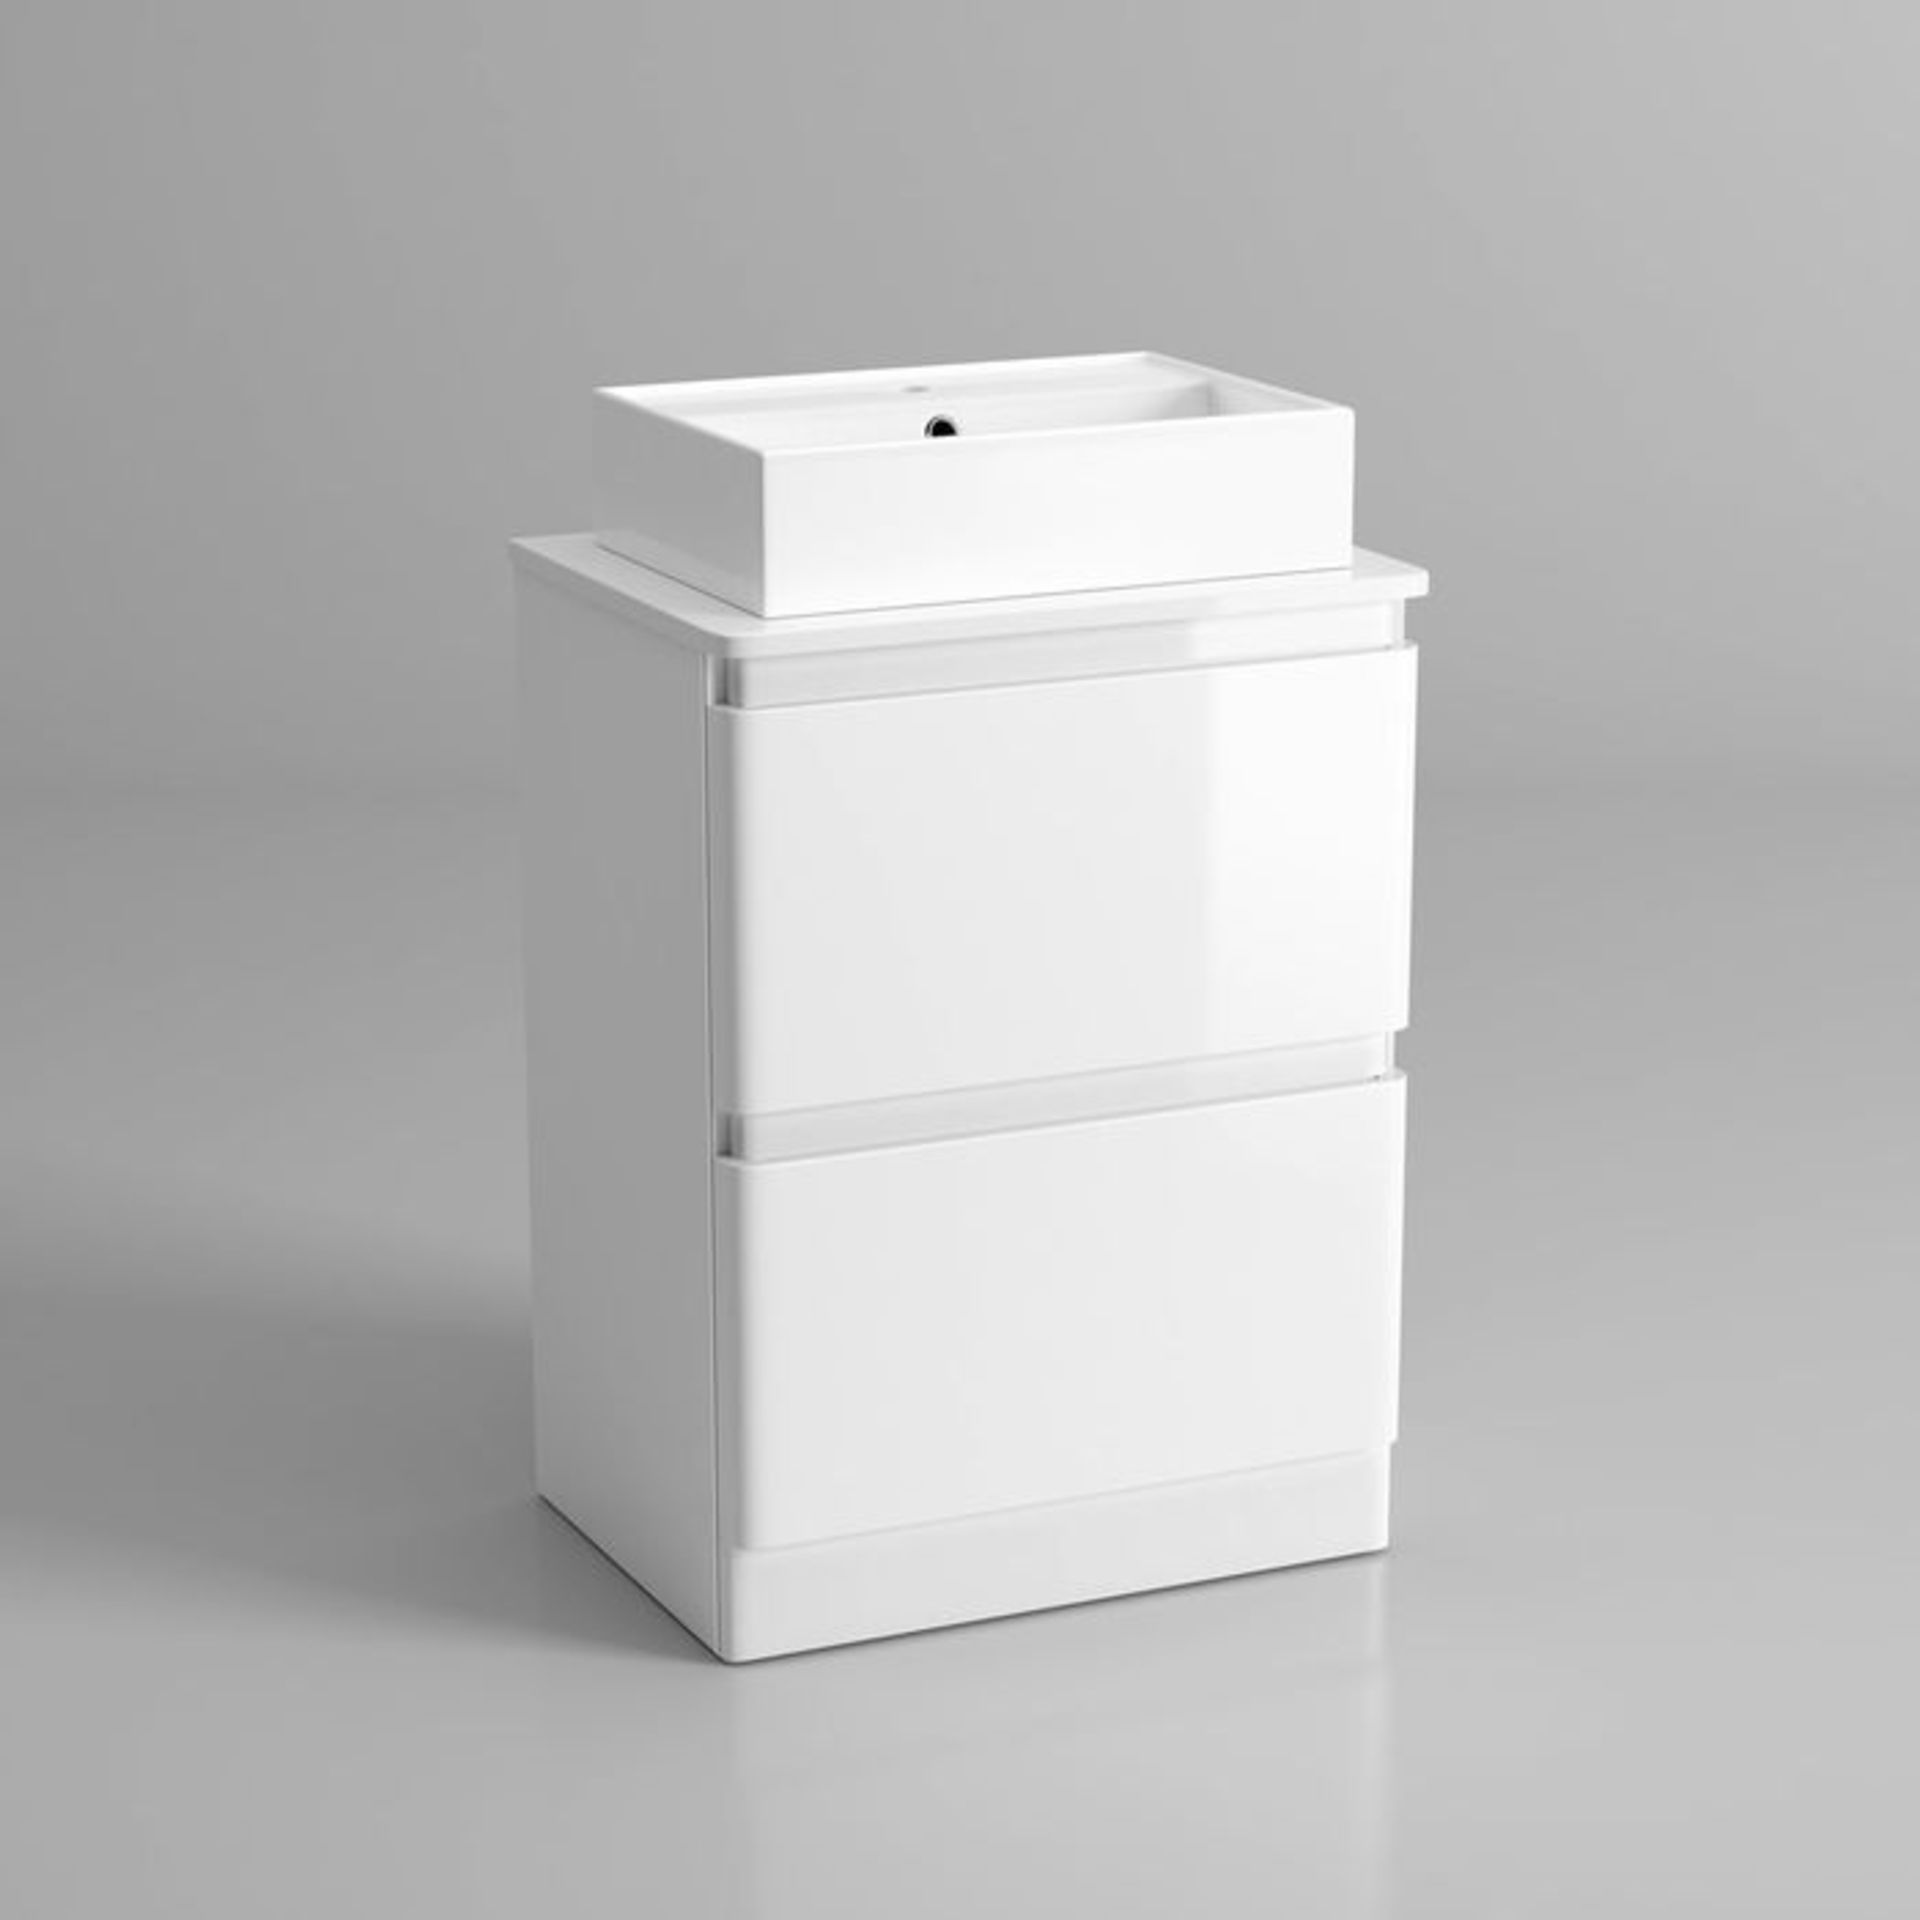 (YC161) 600mm Denver Gloss White Countertop Unit and Elisa Basin - Floor Standing. RRP £499.99. - Image 4 of 4